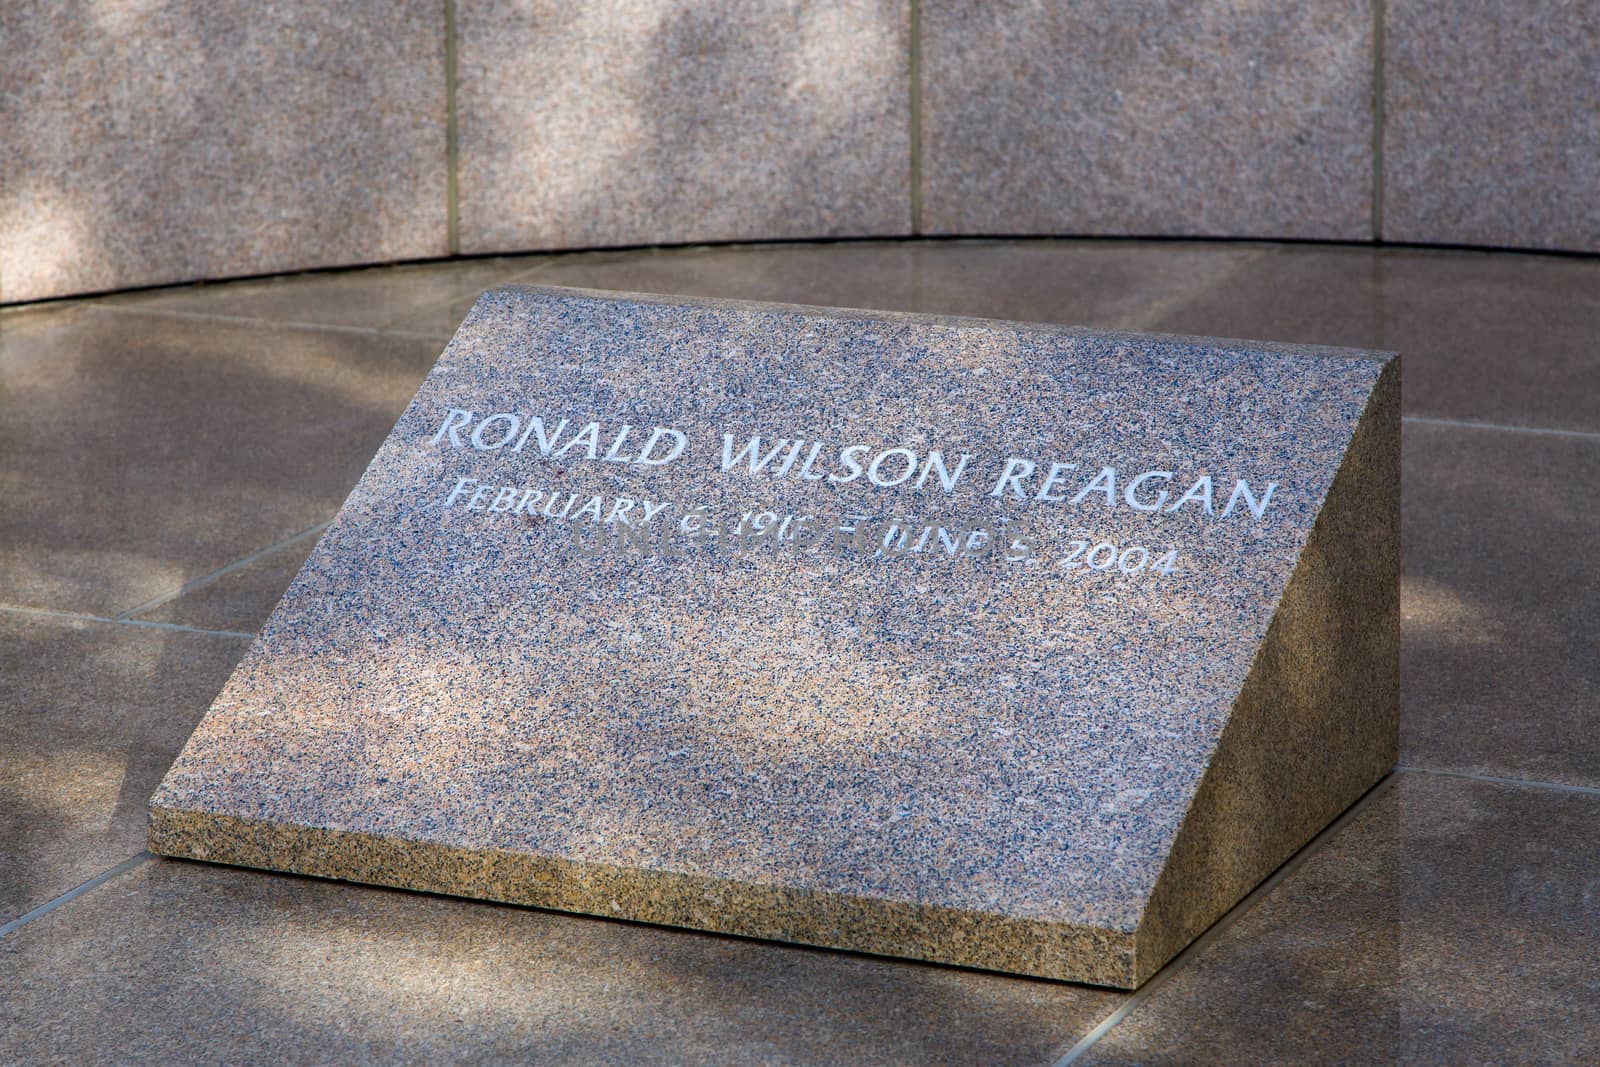 SIMI VALLEY, CA/USA - JANUARY 23, 2016: Grave of Ronald Reagan at the Ronald Reagan Presidential Library and Museum.